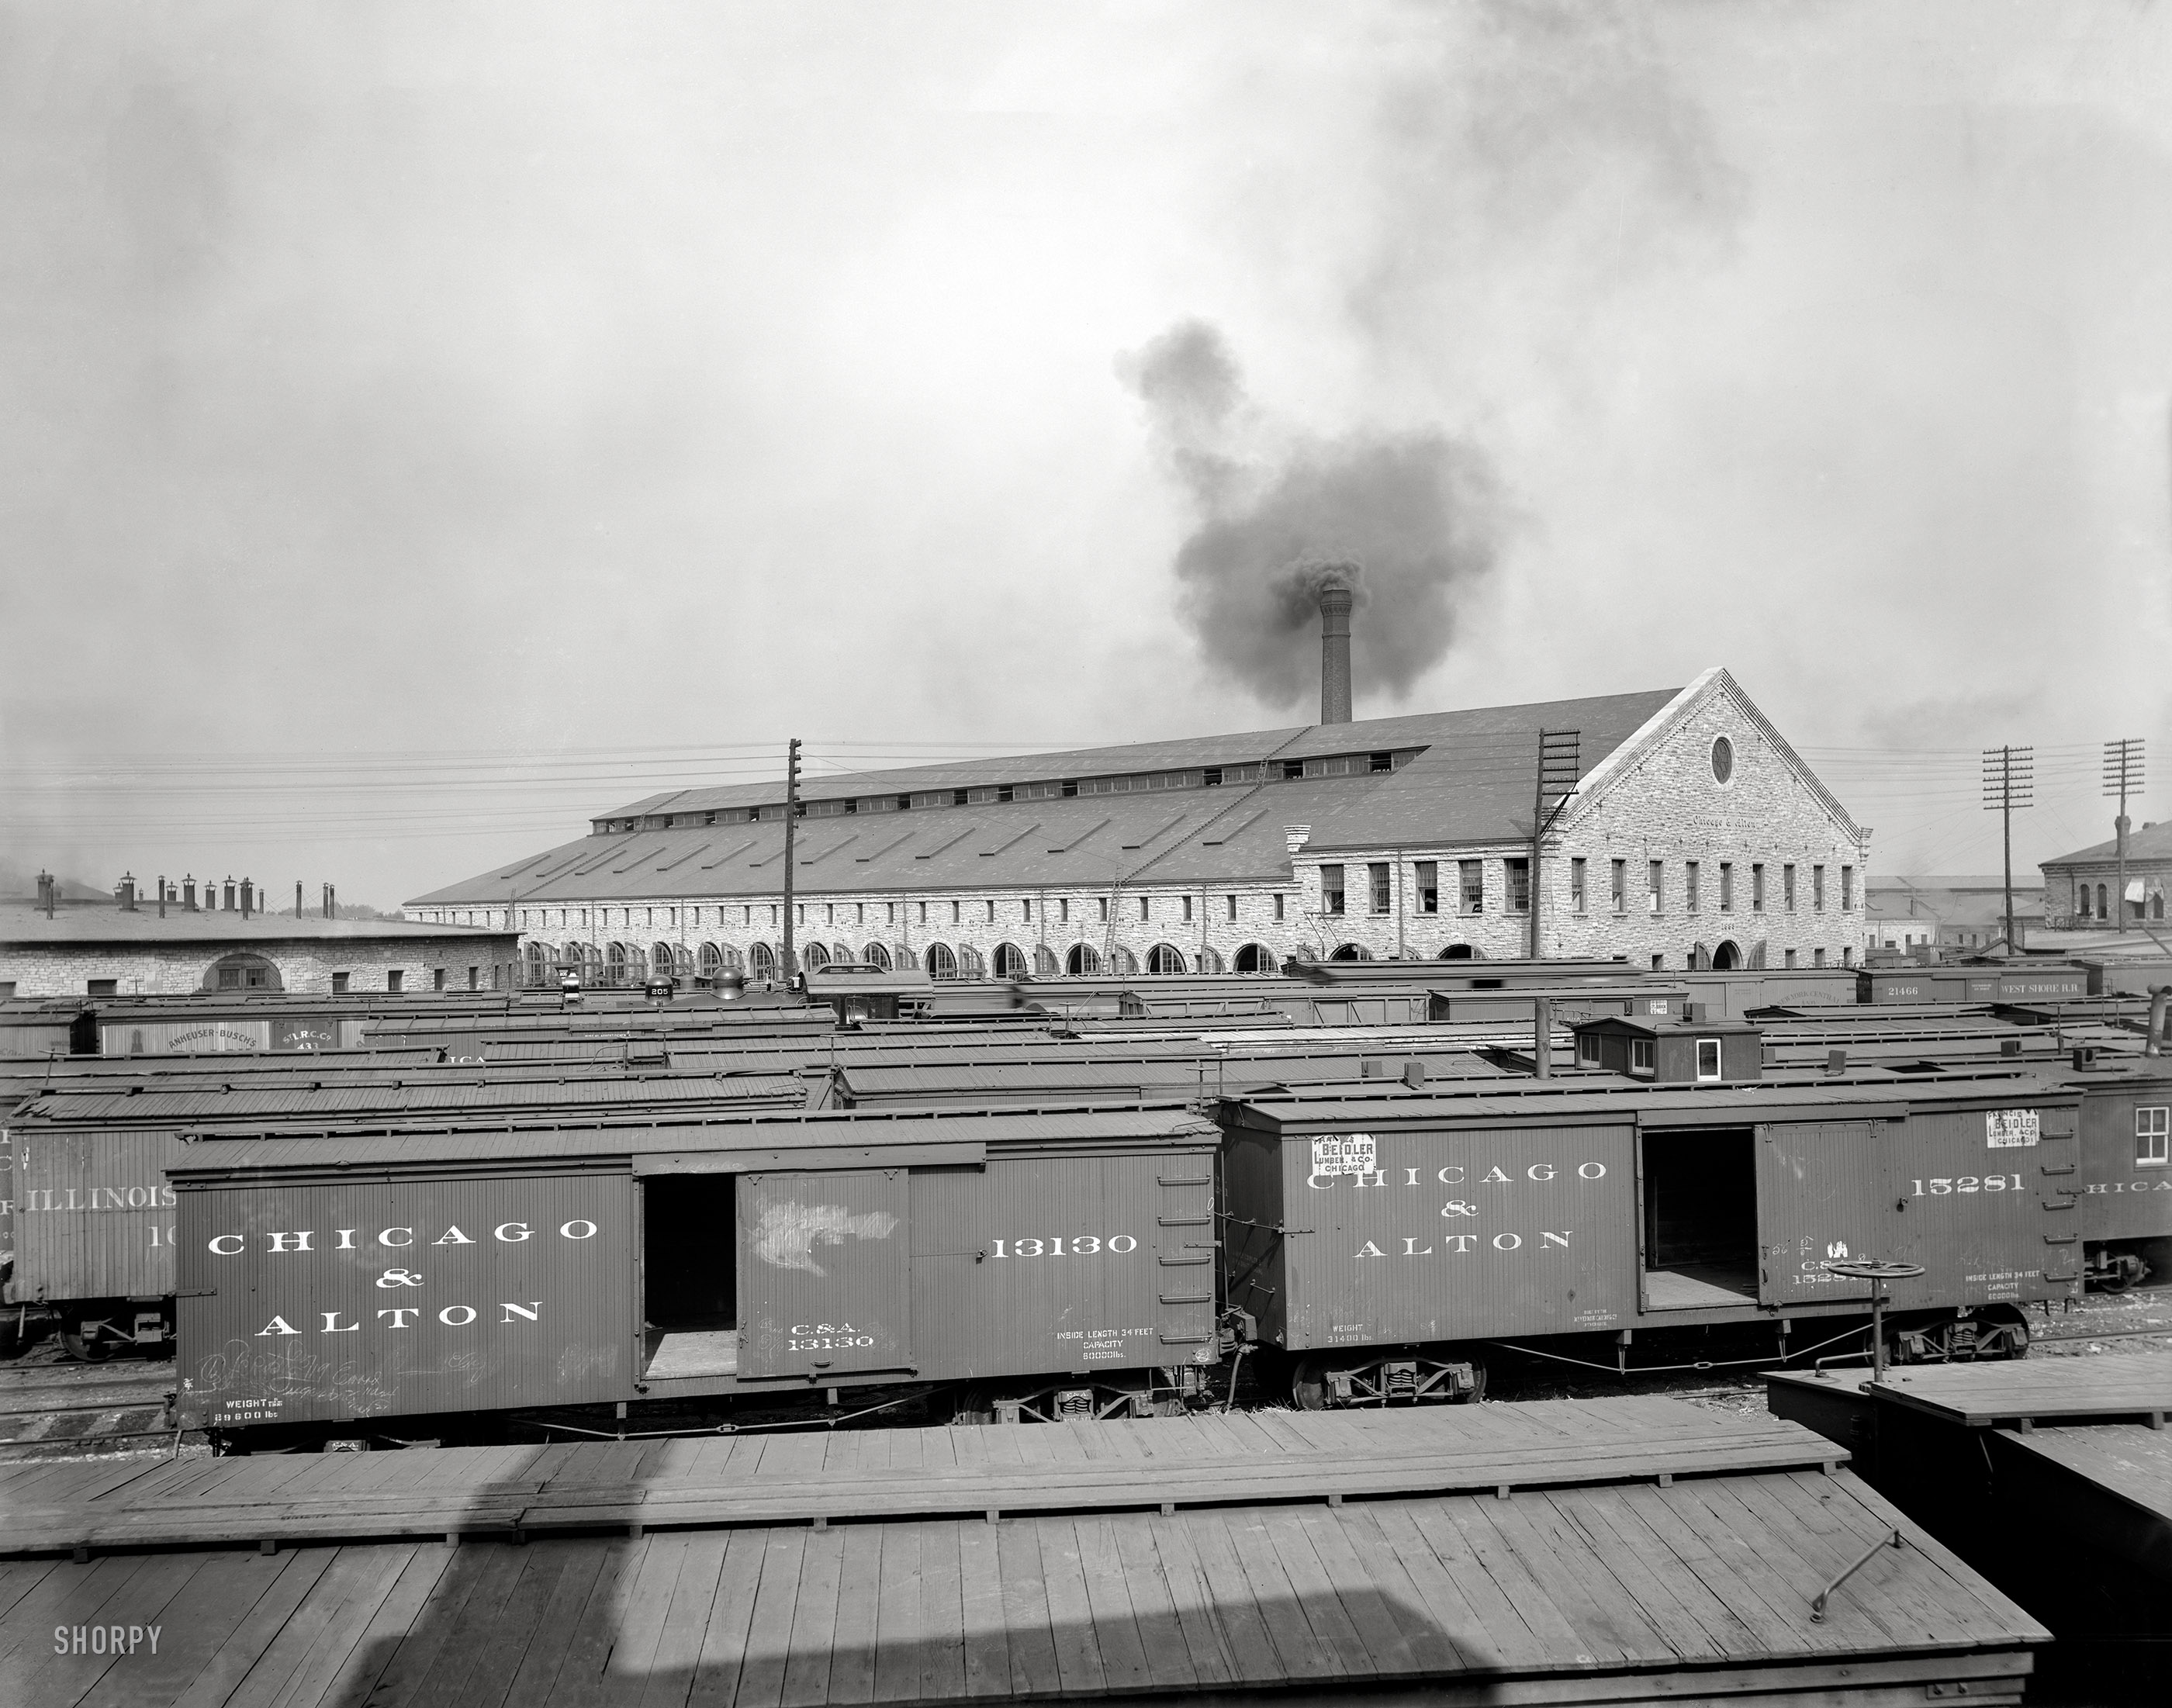 Circa 1904. "Chicago & Alton Railroad shops at Bloomington, Illinois." At left rear, the Anheuser-Busch beer boxcar. 8x10 inch glass negative. View full size.